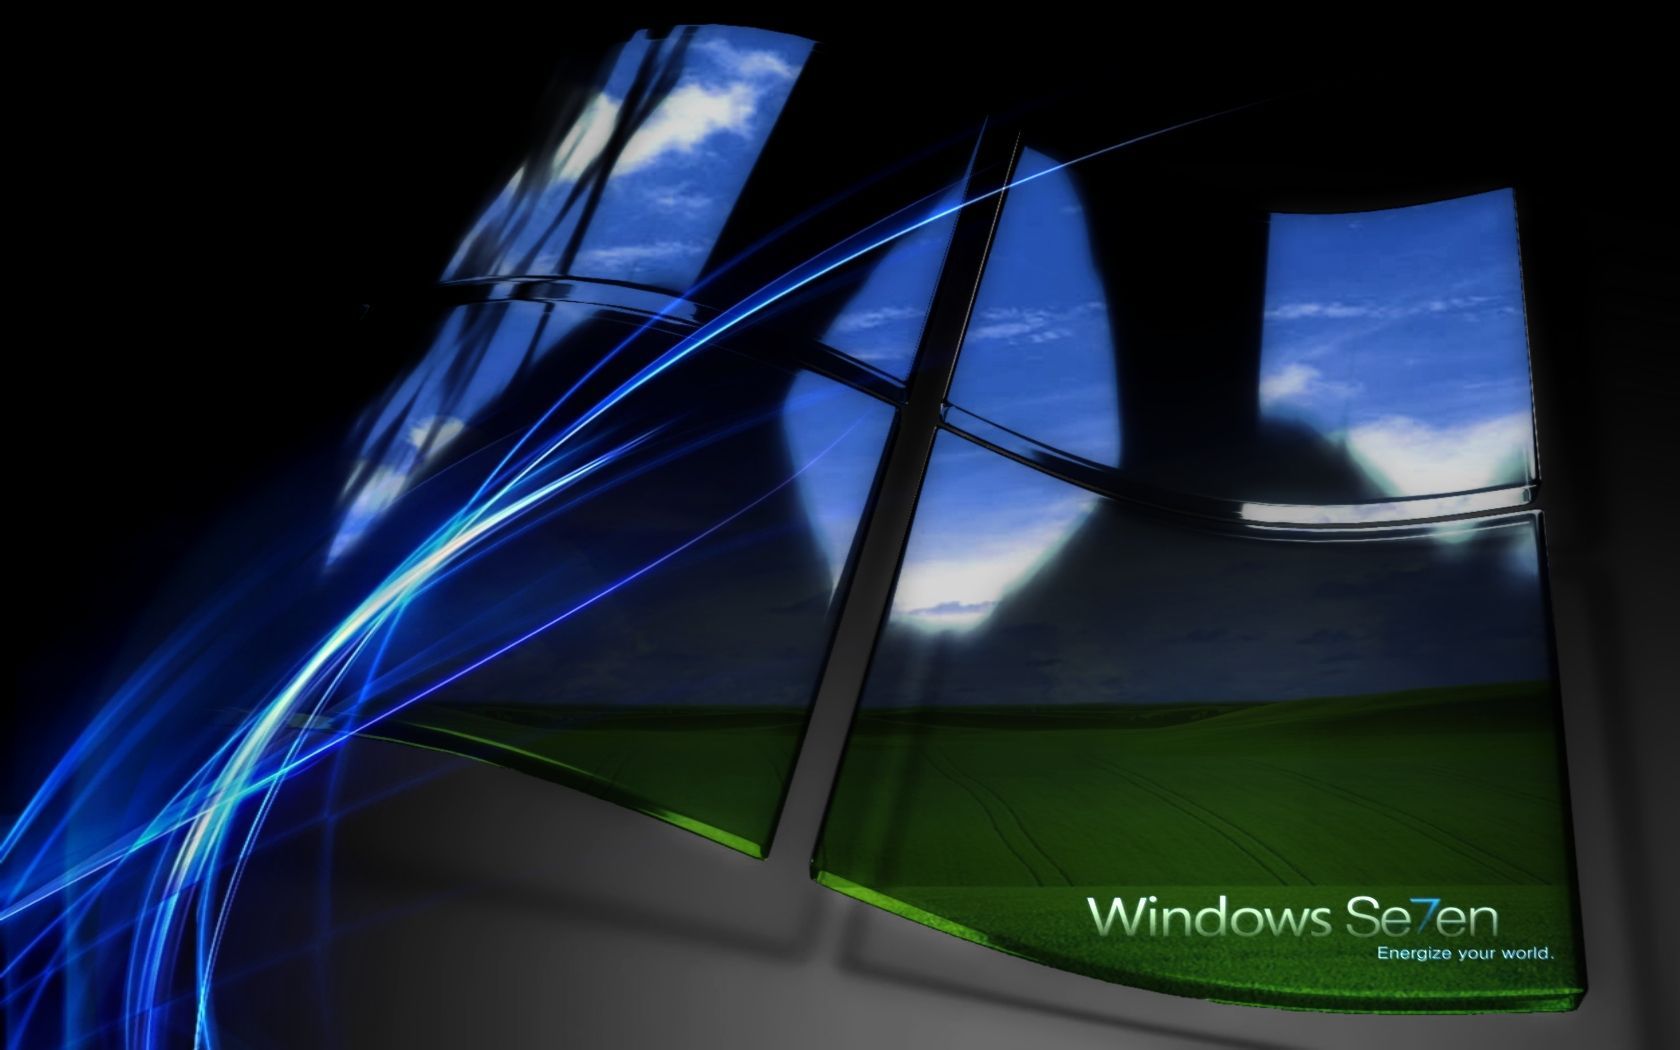 Windows 7 Ultimate HD Wallpaper - HD Images New